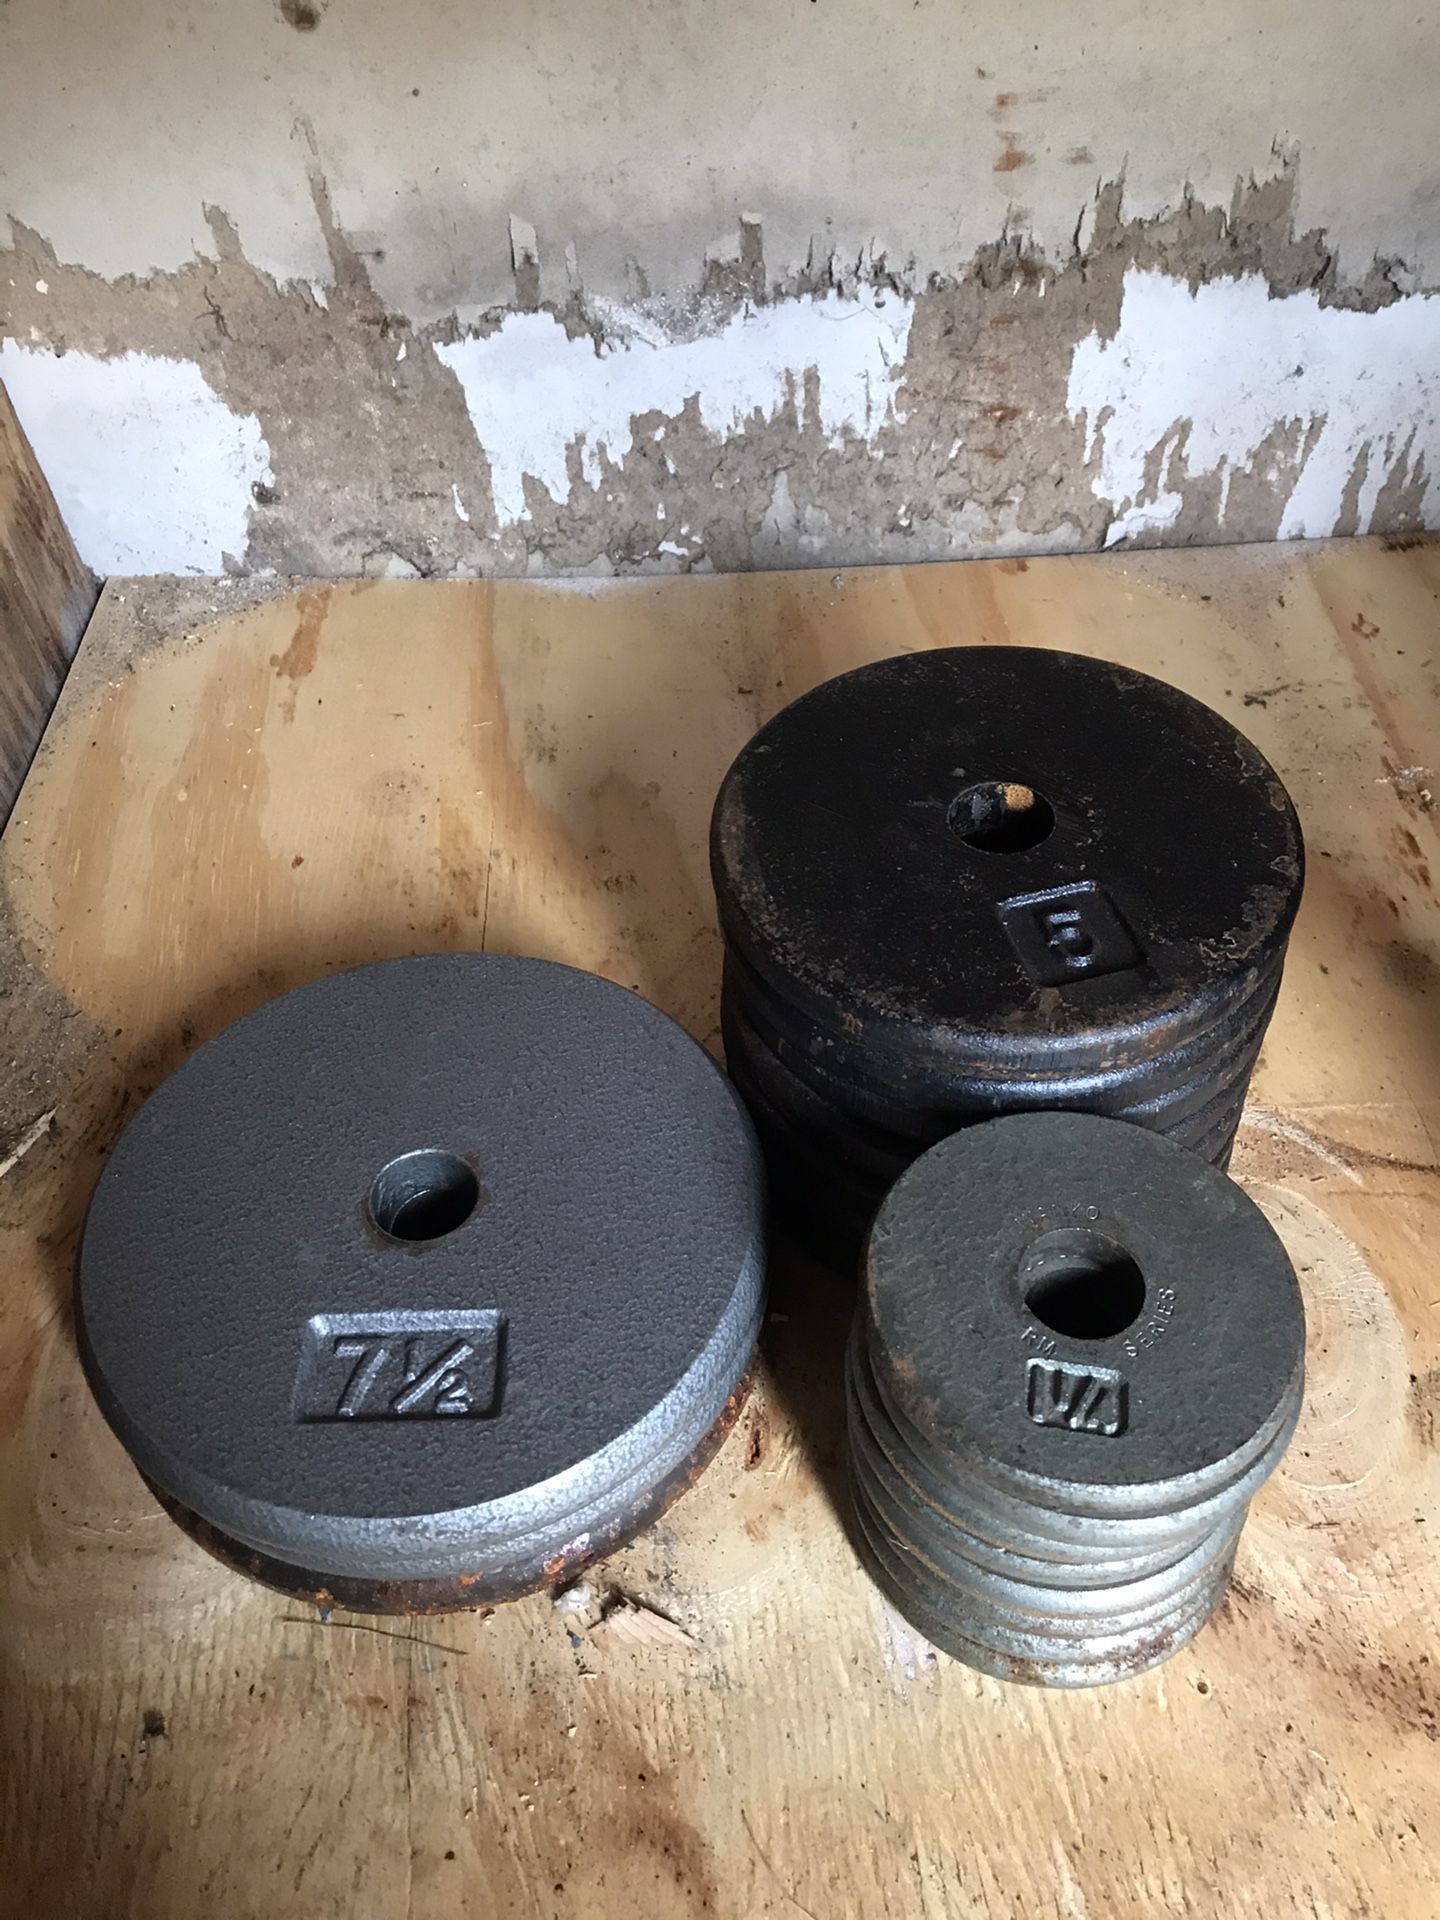 7.5lbs, 5lbs and 1.25lbs Pancake Plates Dumbbells 50 cents per pound